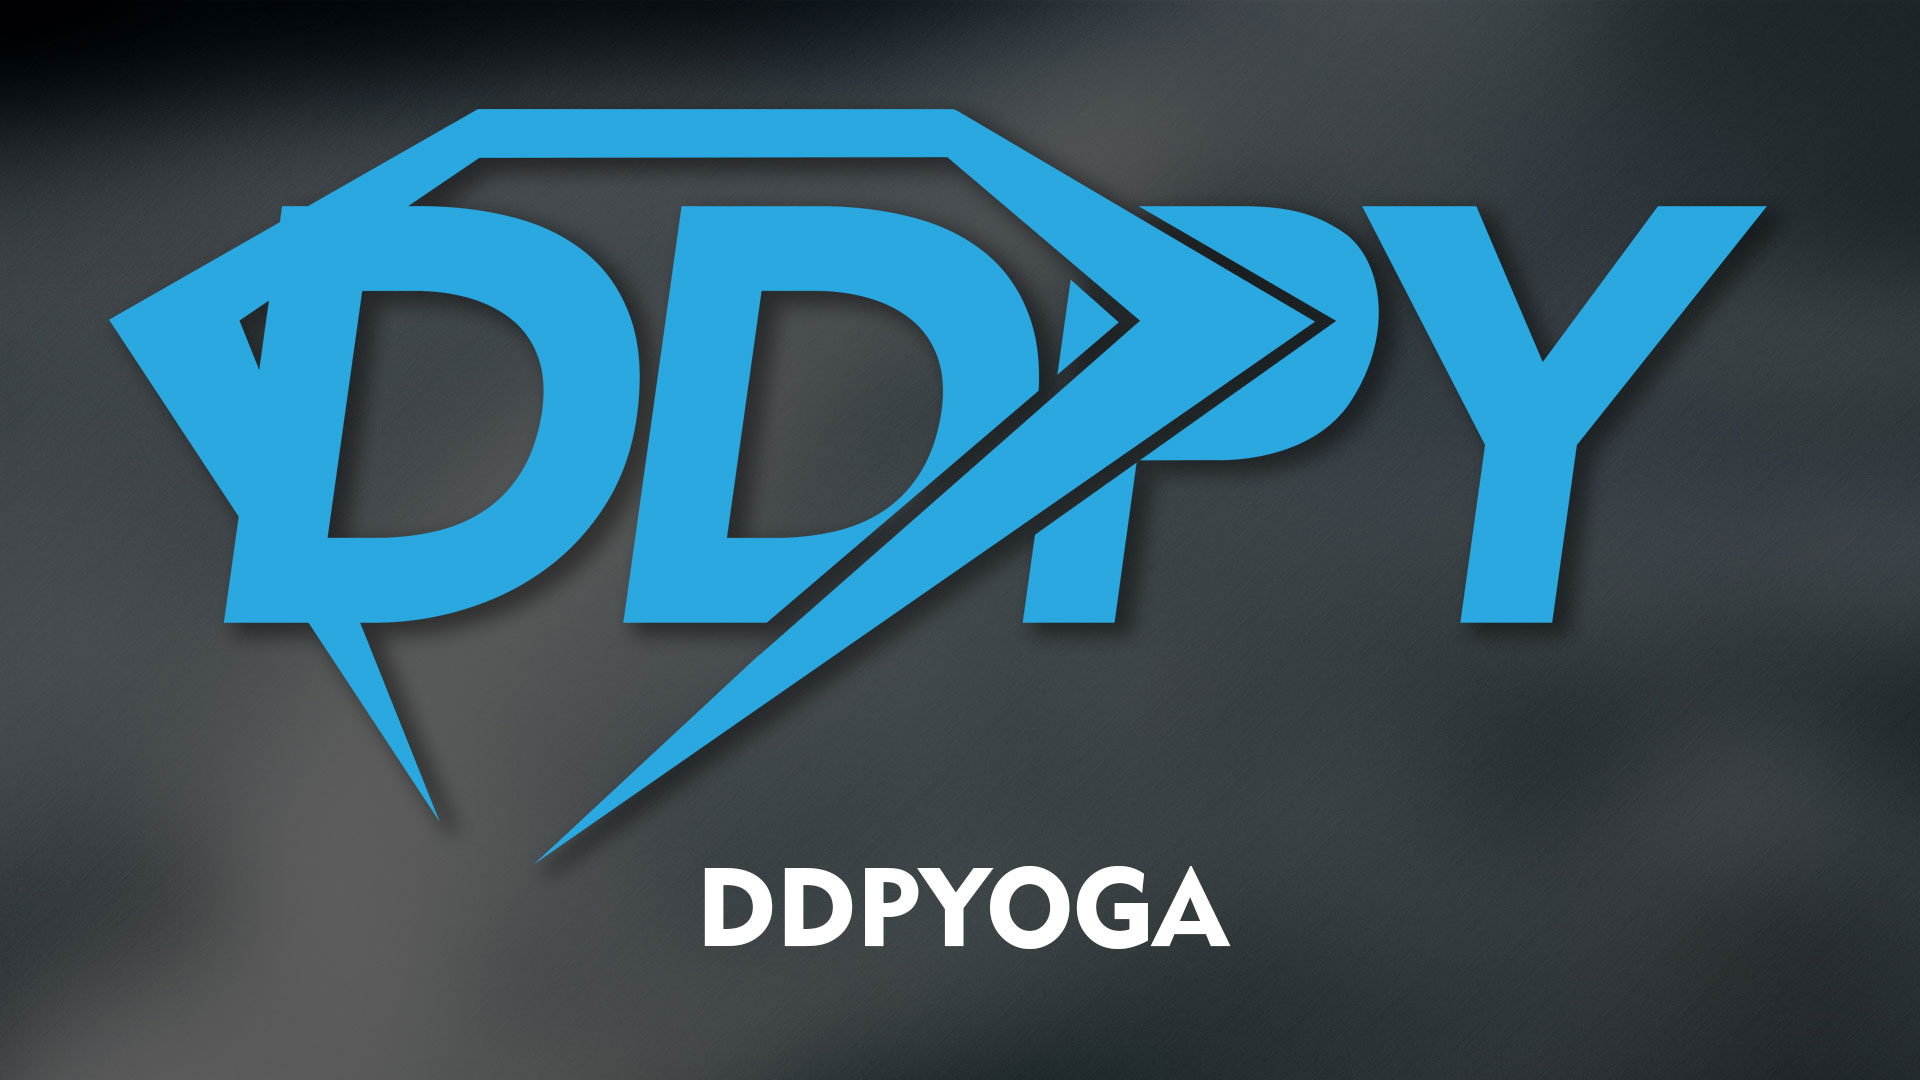 ddp yoga now not logged in